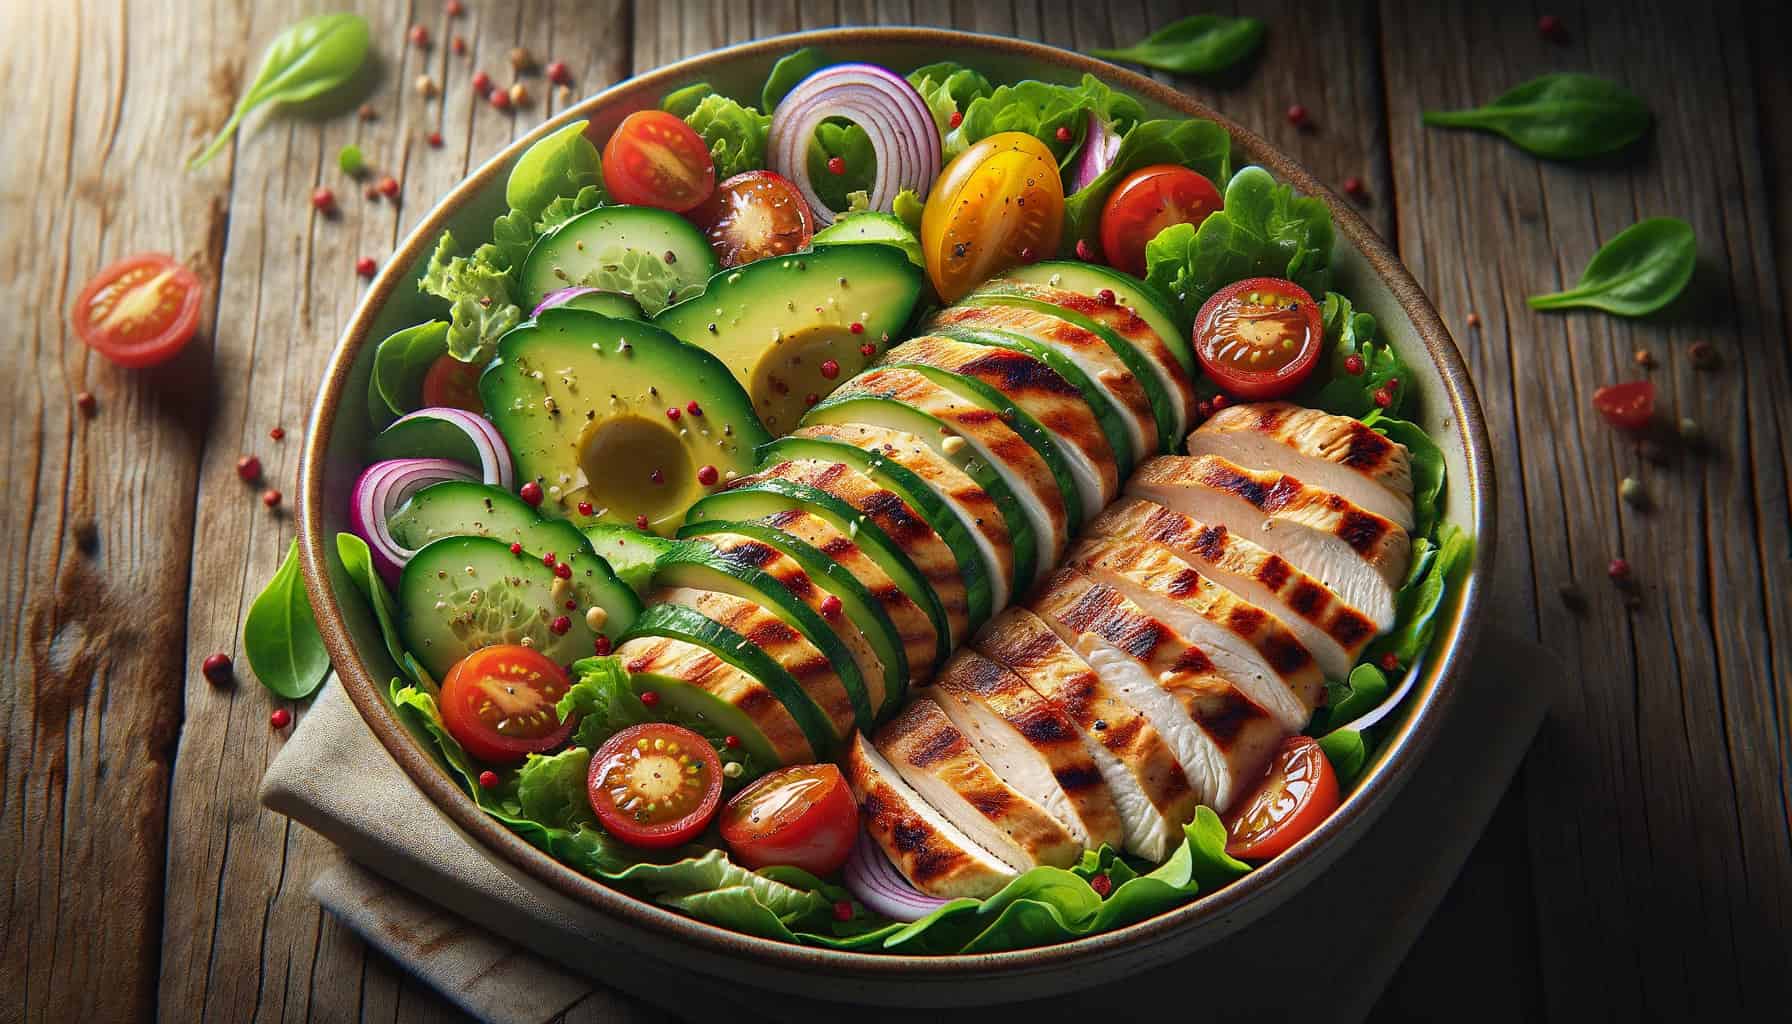 Grilled chicken salad with fresh greens, grilled chicken breast, and low-carb vegetables like cherry tomatoes, cucumbers, and avocado